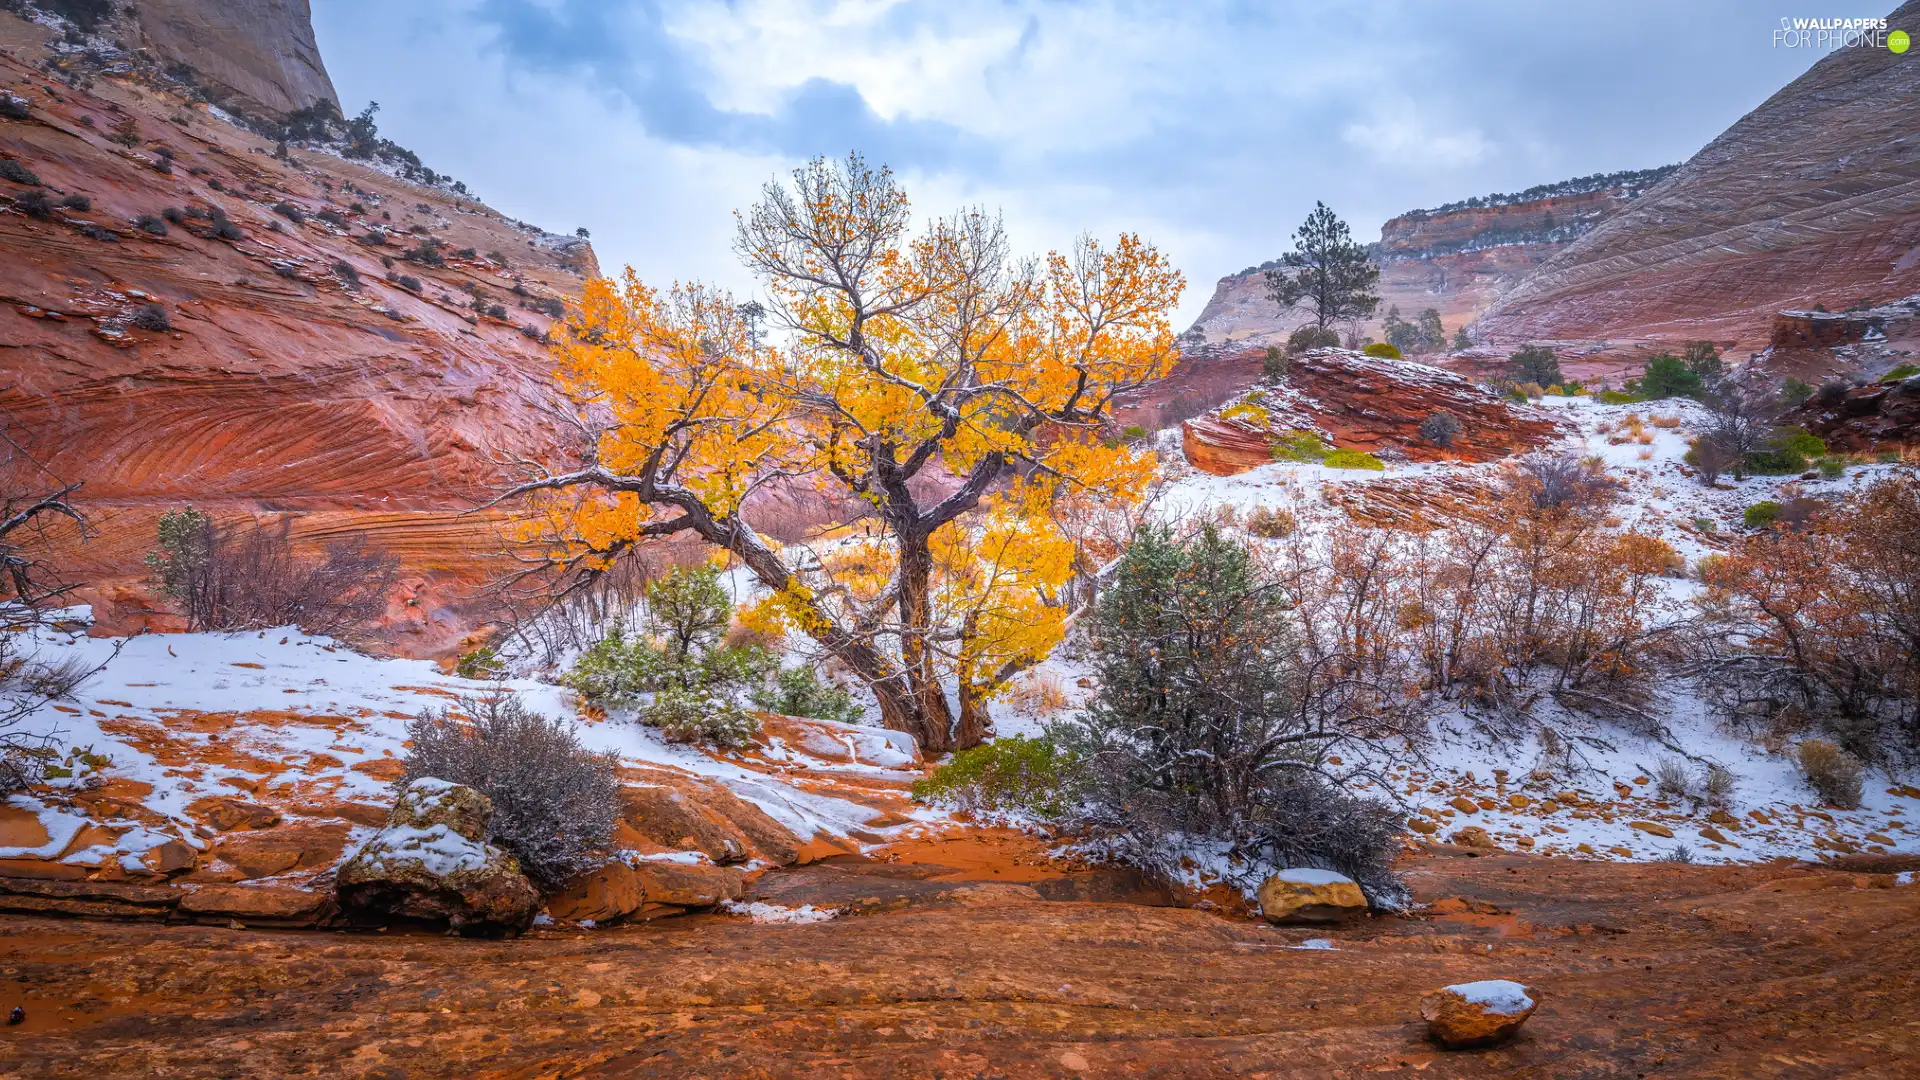 snow, Zion National Park, Yellowed, trees, Utah State, The United States, Mountains, rocks, Bush